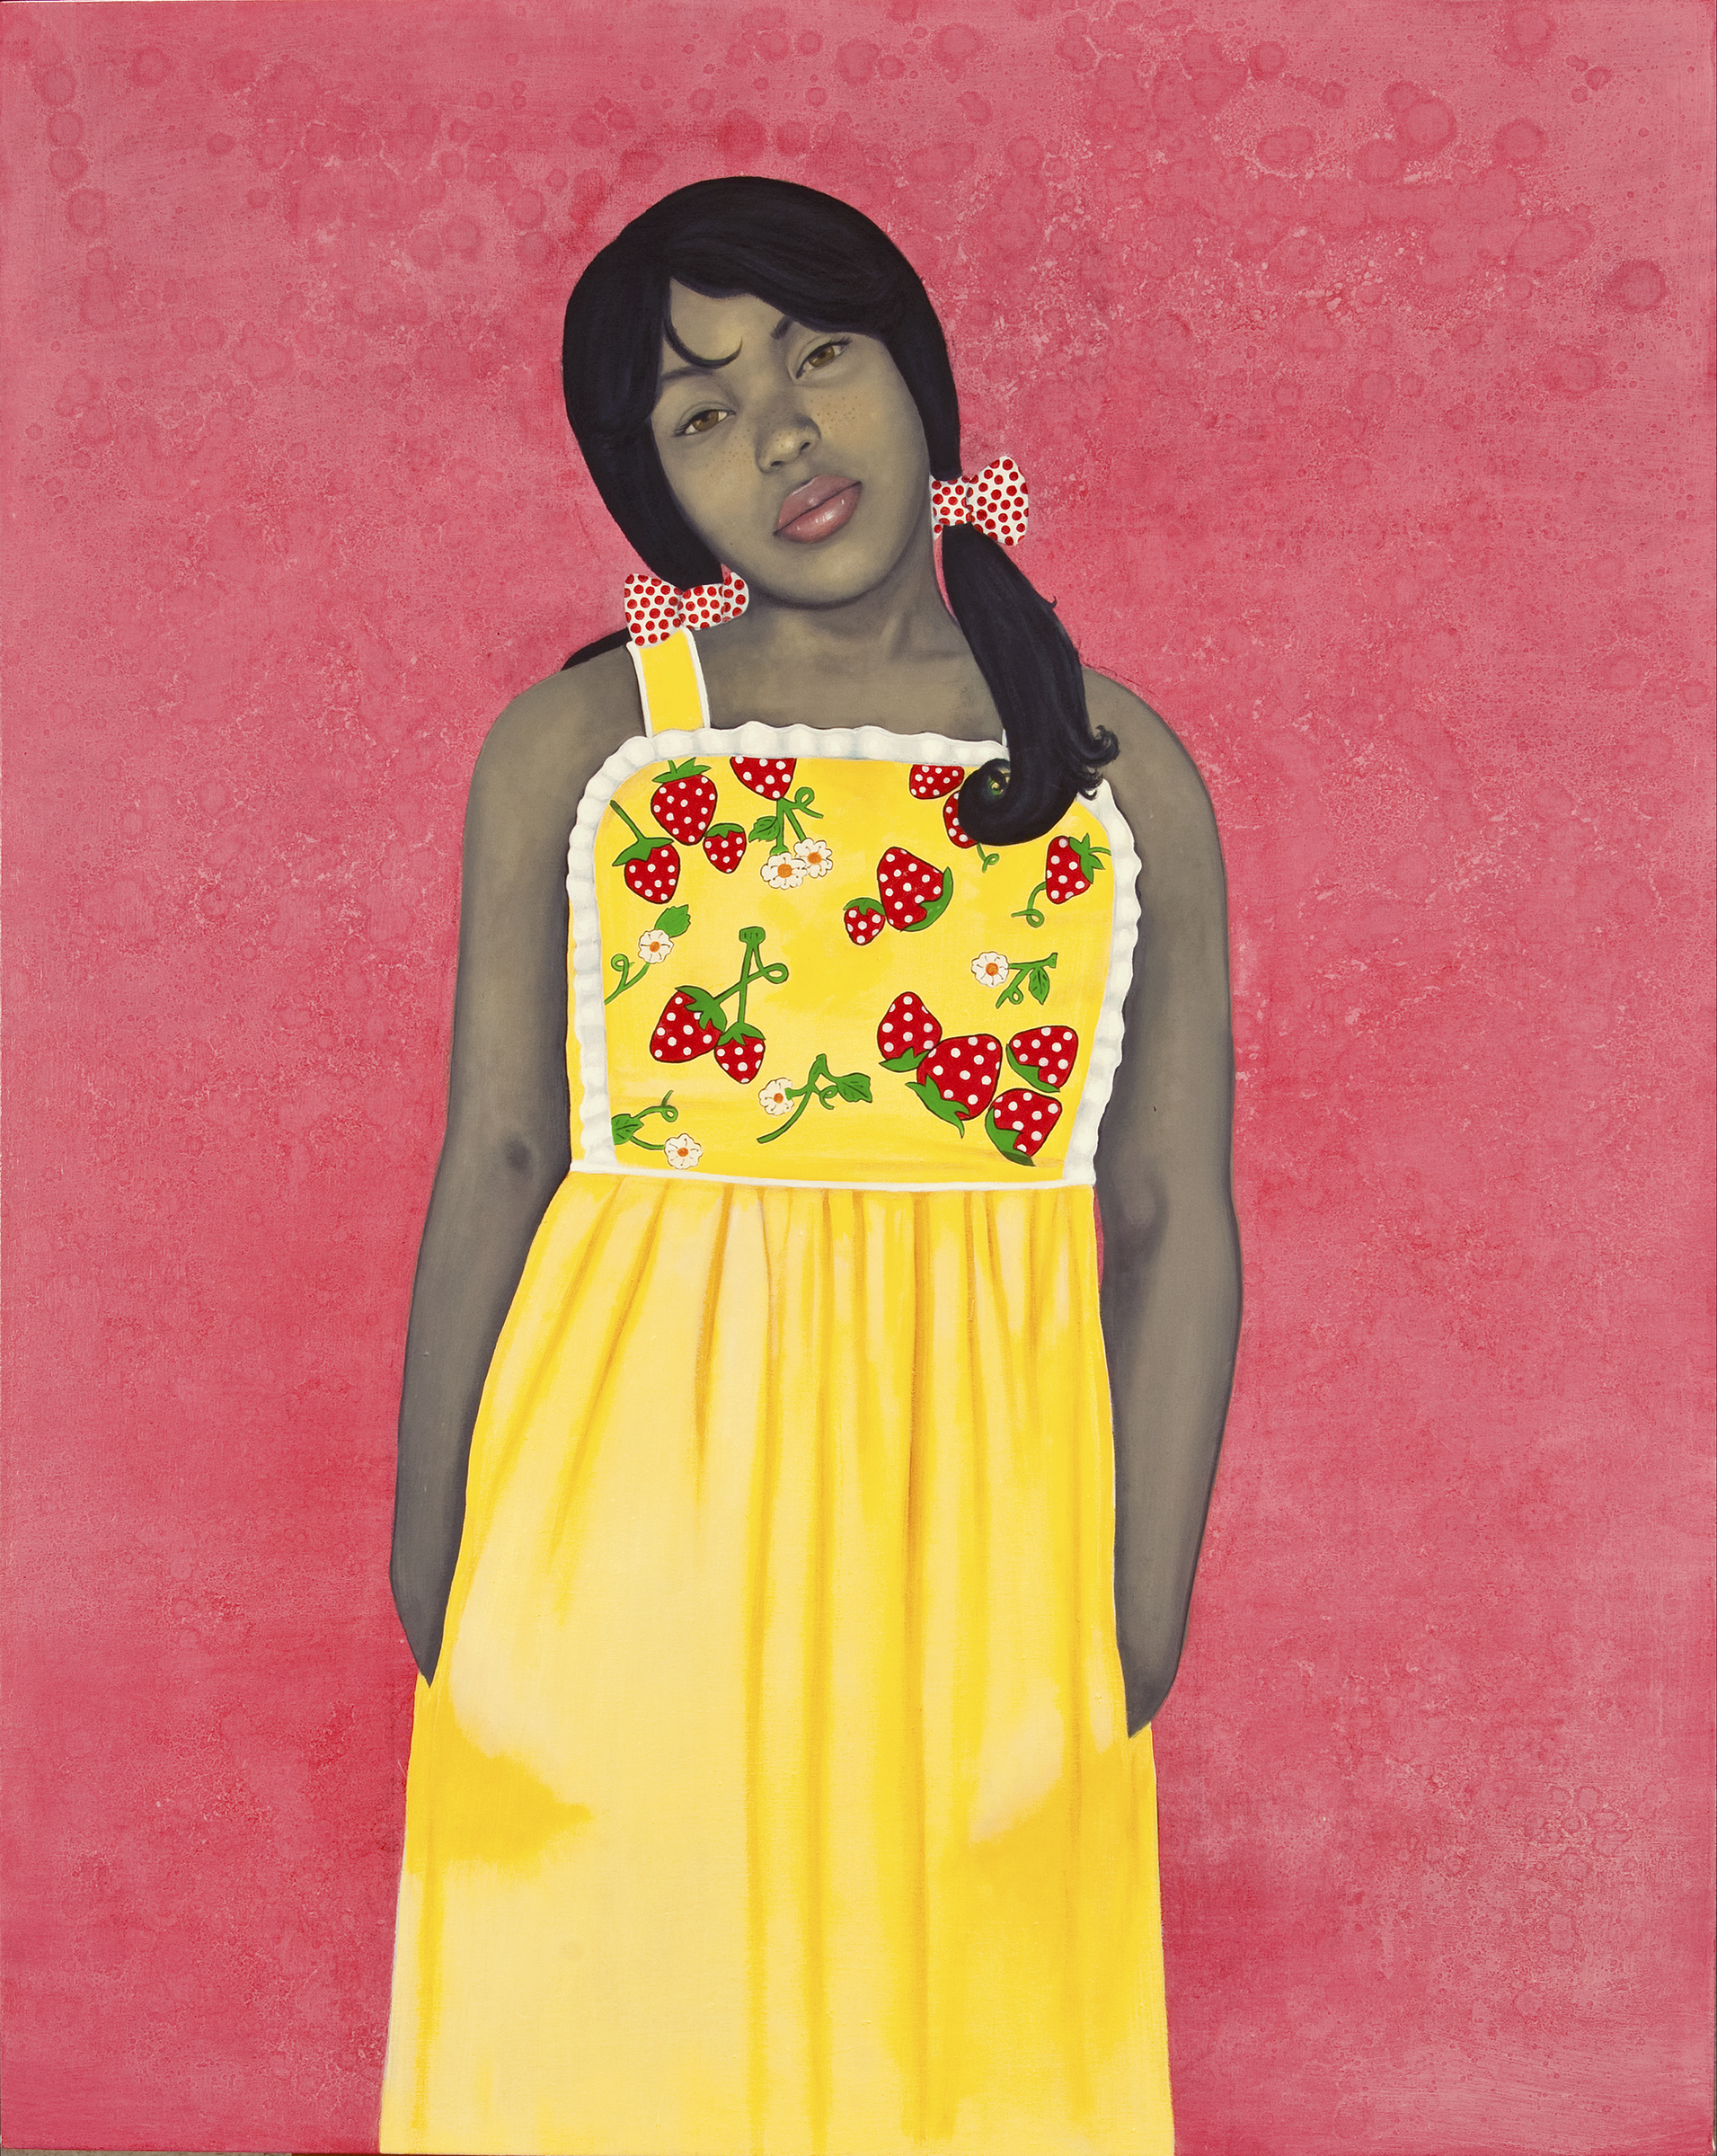 They call me Redbone but I’d rather be Strawberry Shortcake by Amy Sherald - 2009年 - 54 x 43 インチ 